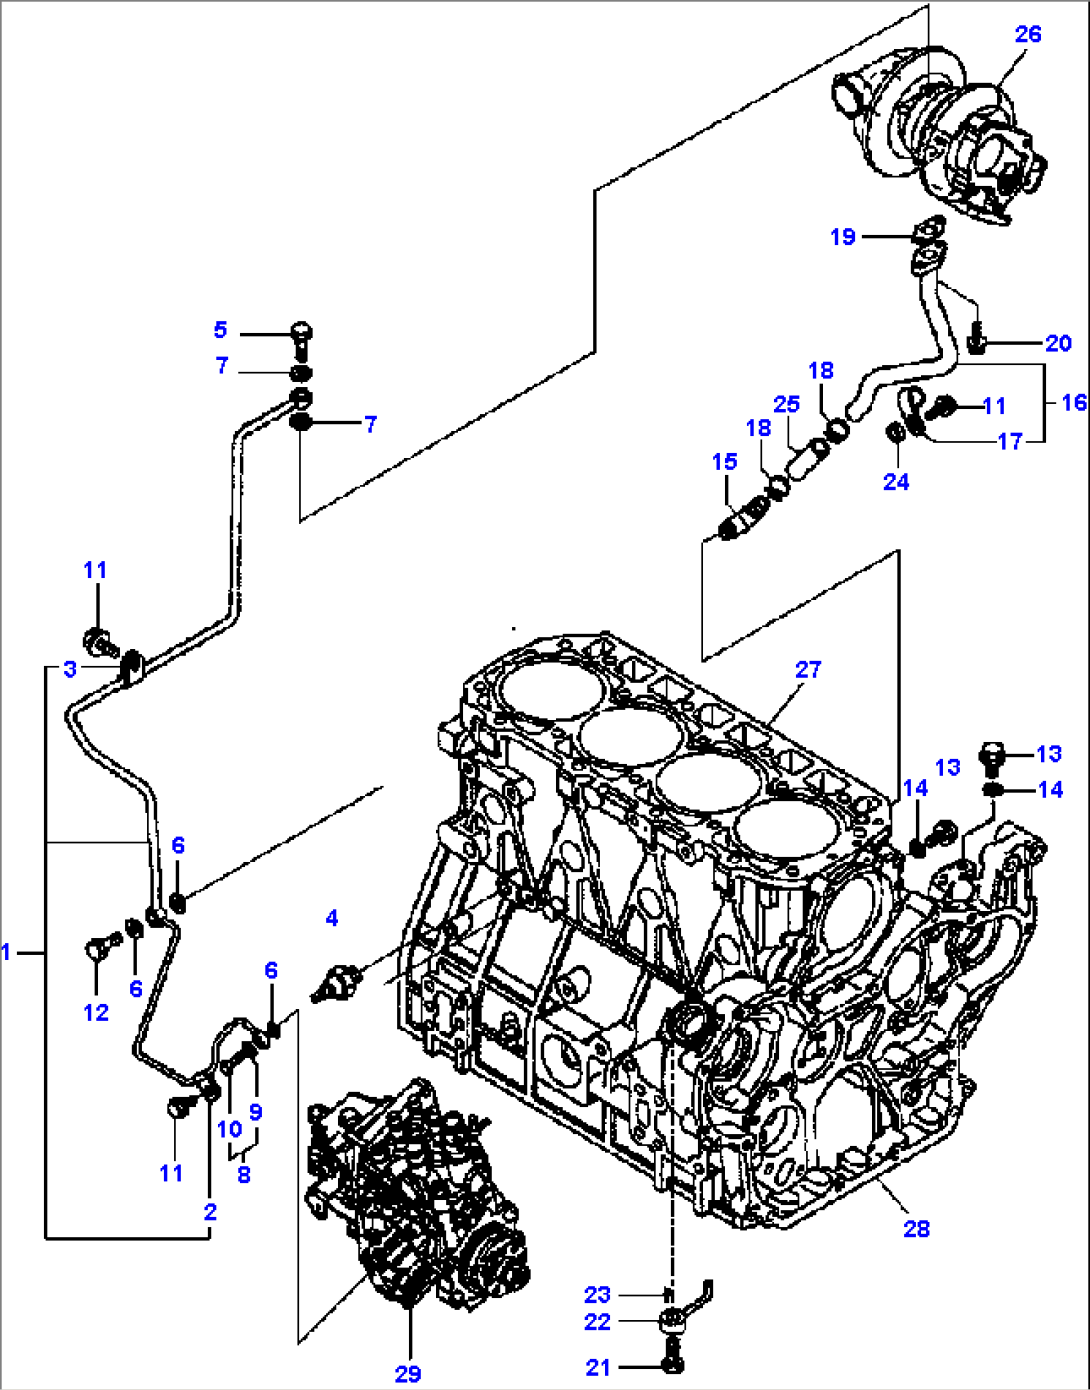 A0110-0311 LUBRICATING OIL SYSTEM (2/2)